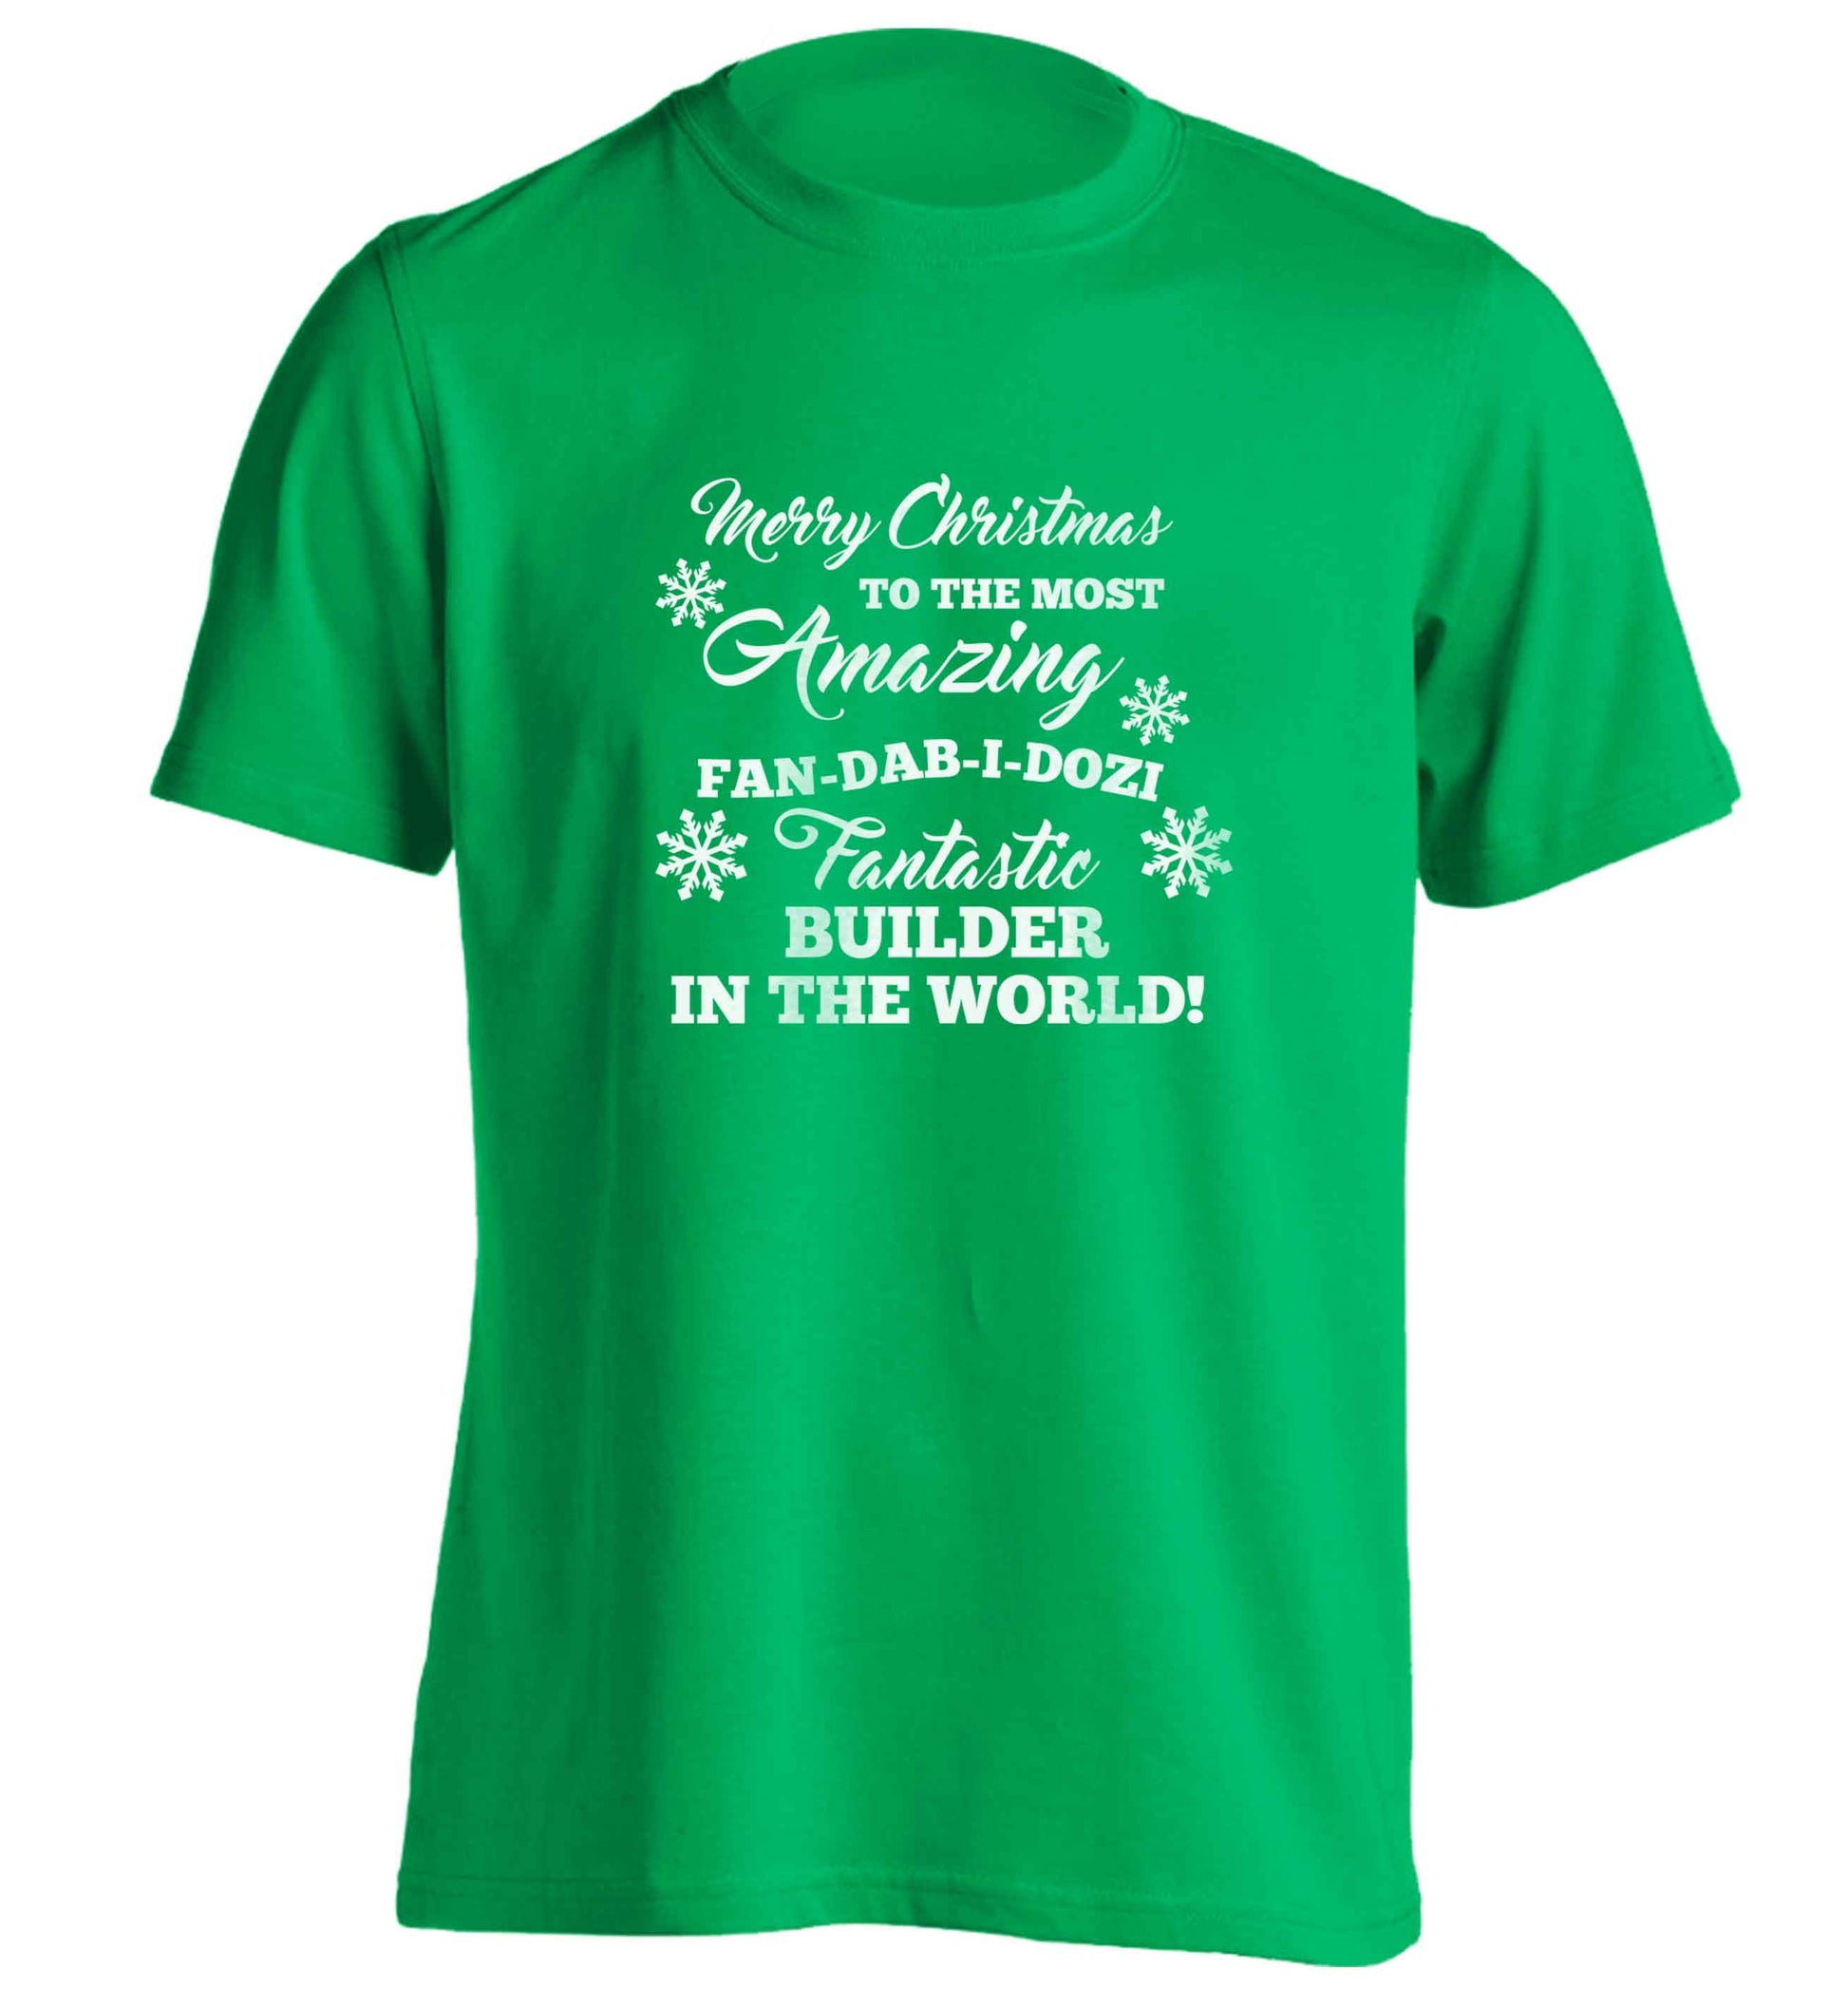 Merry Christmas to the most amazing builder in the world! adults unisex green Tshirt 2XL